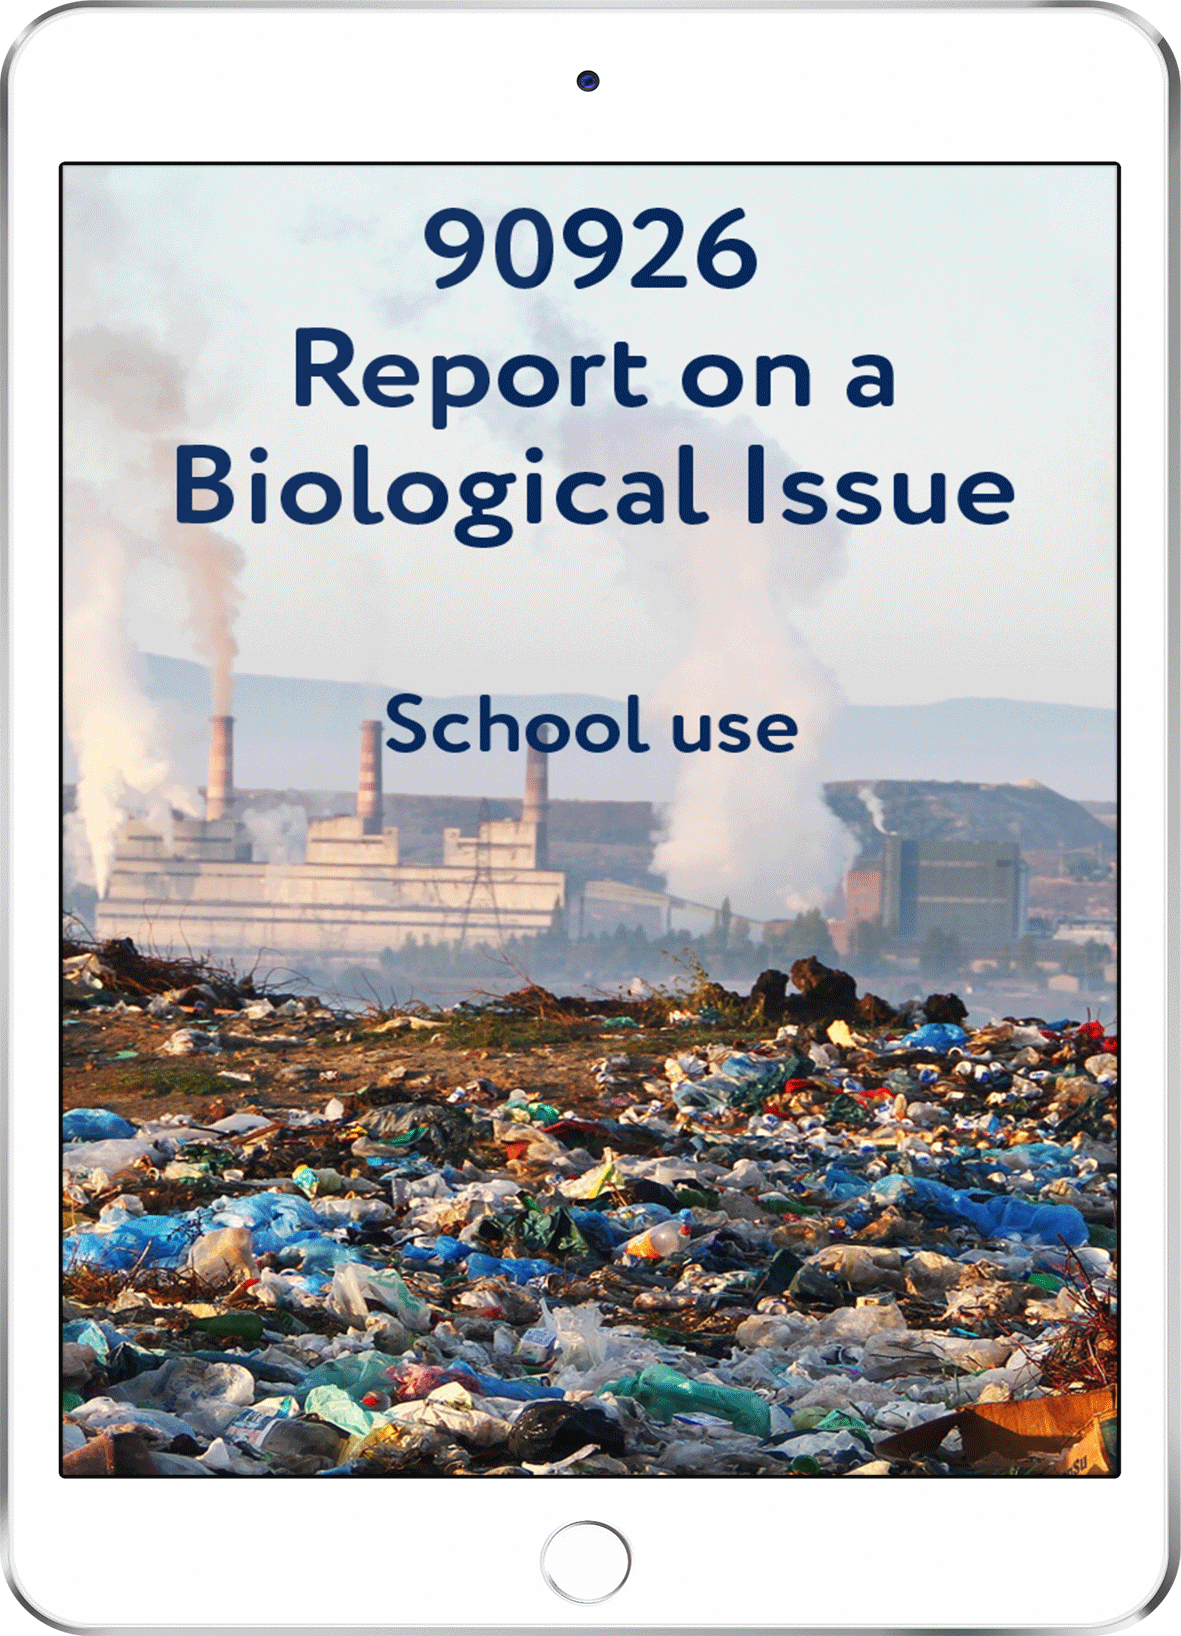 90926 Report on a Biological Issue - School Use